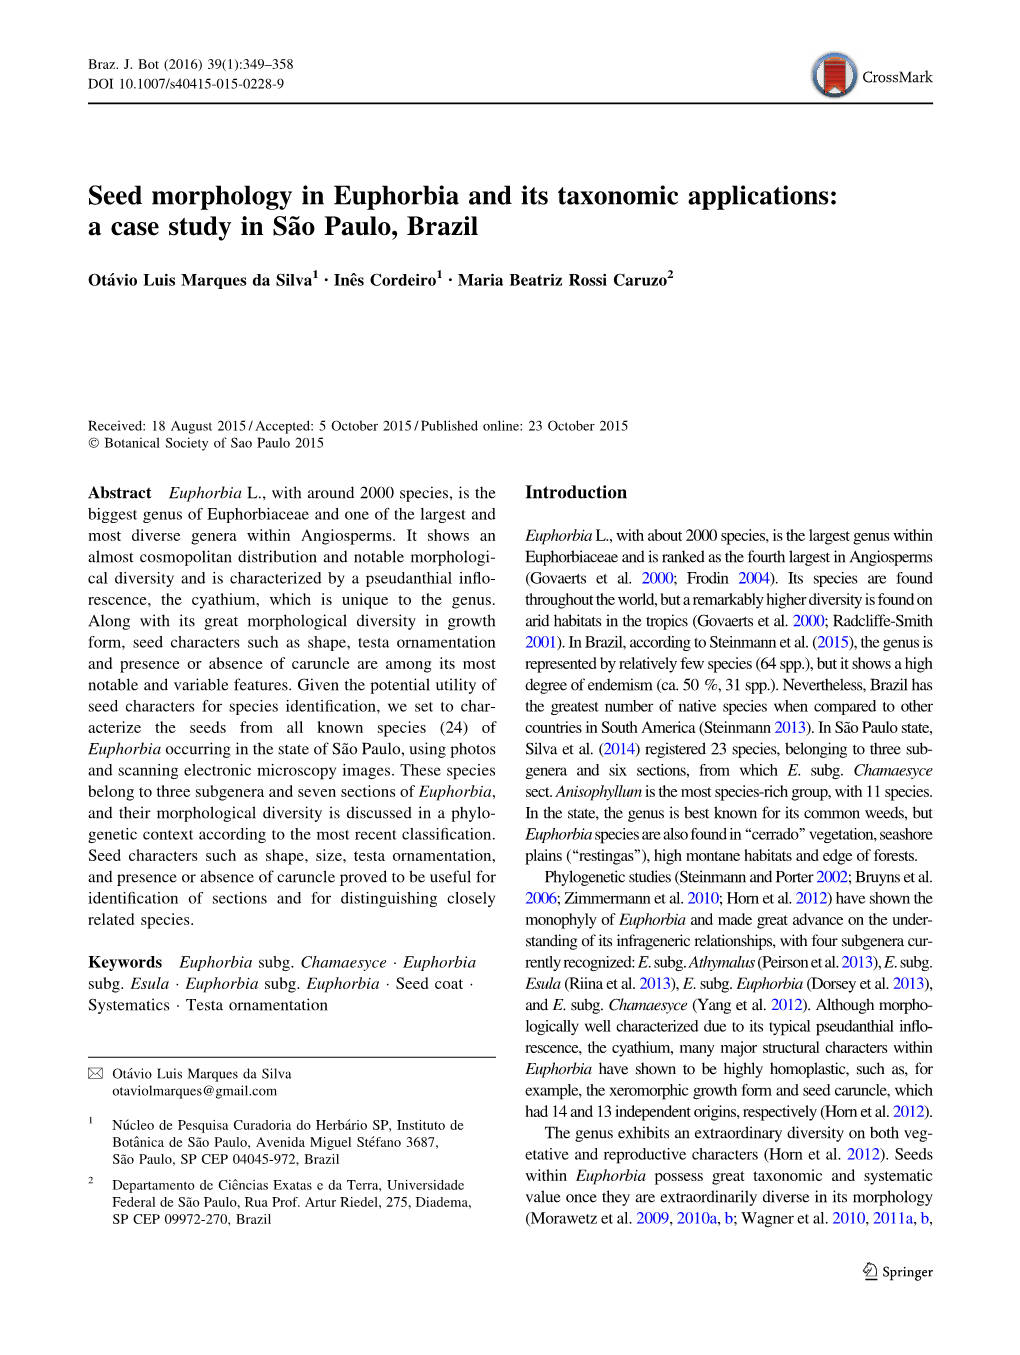 Seed Morphology in Euphorbia and Its Taxonomic Applications: a Case Study in Sa˜O Paulo, Brazil